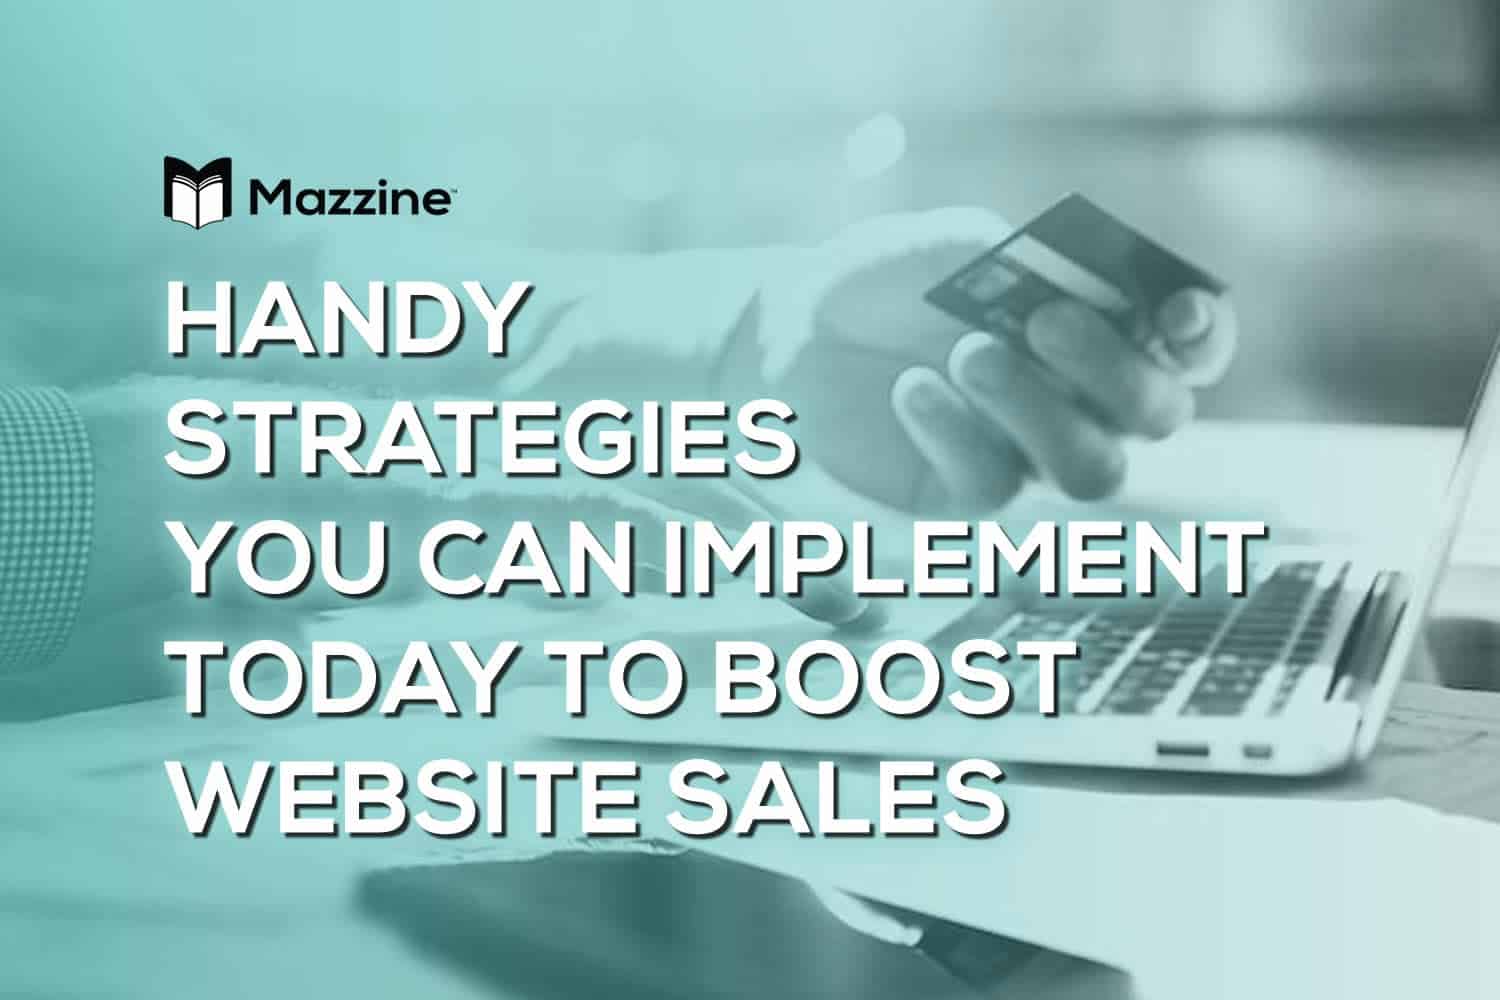 Handy Strategies You Can Implement Today to Boost Website Sales